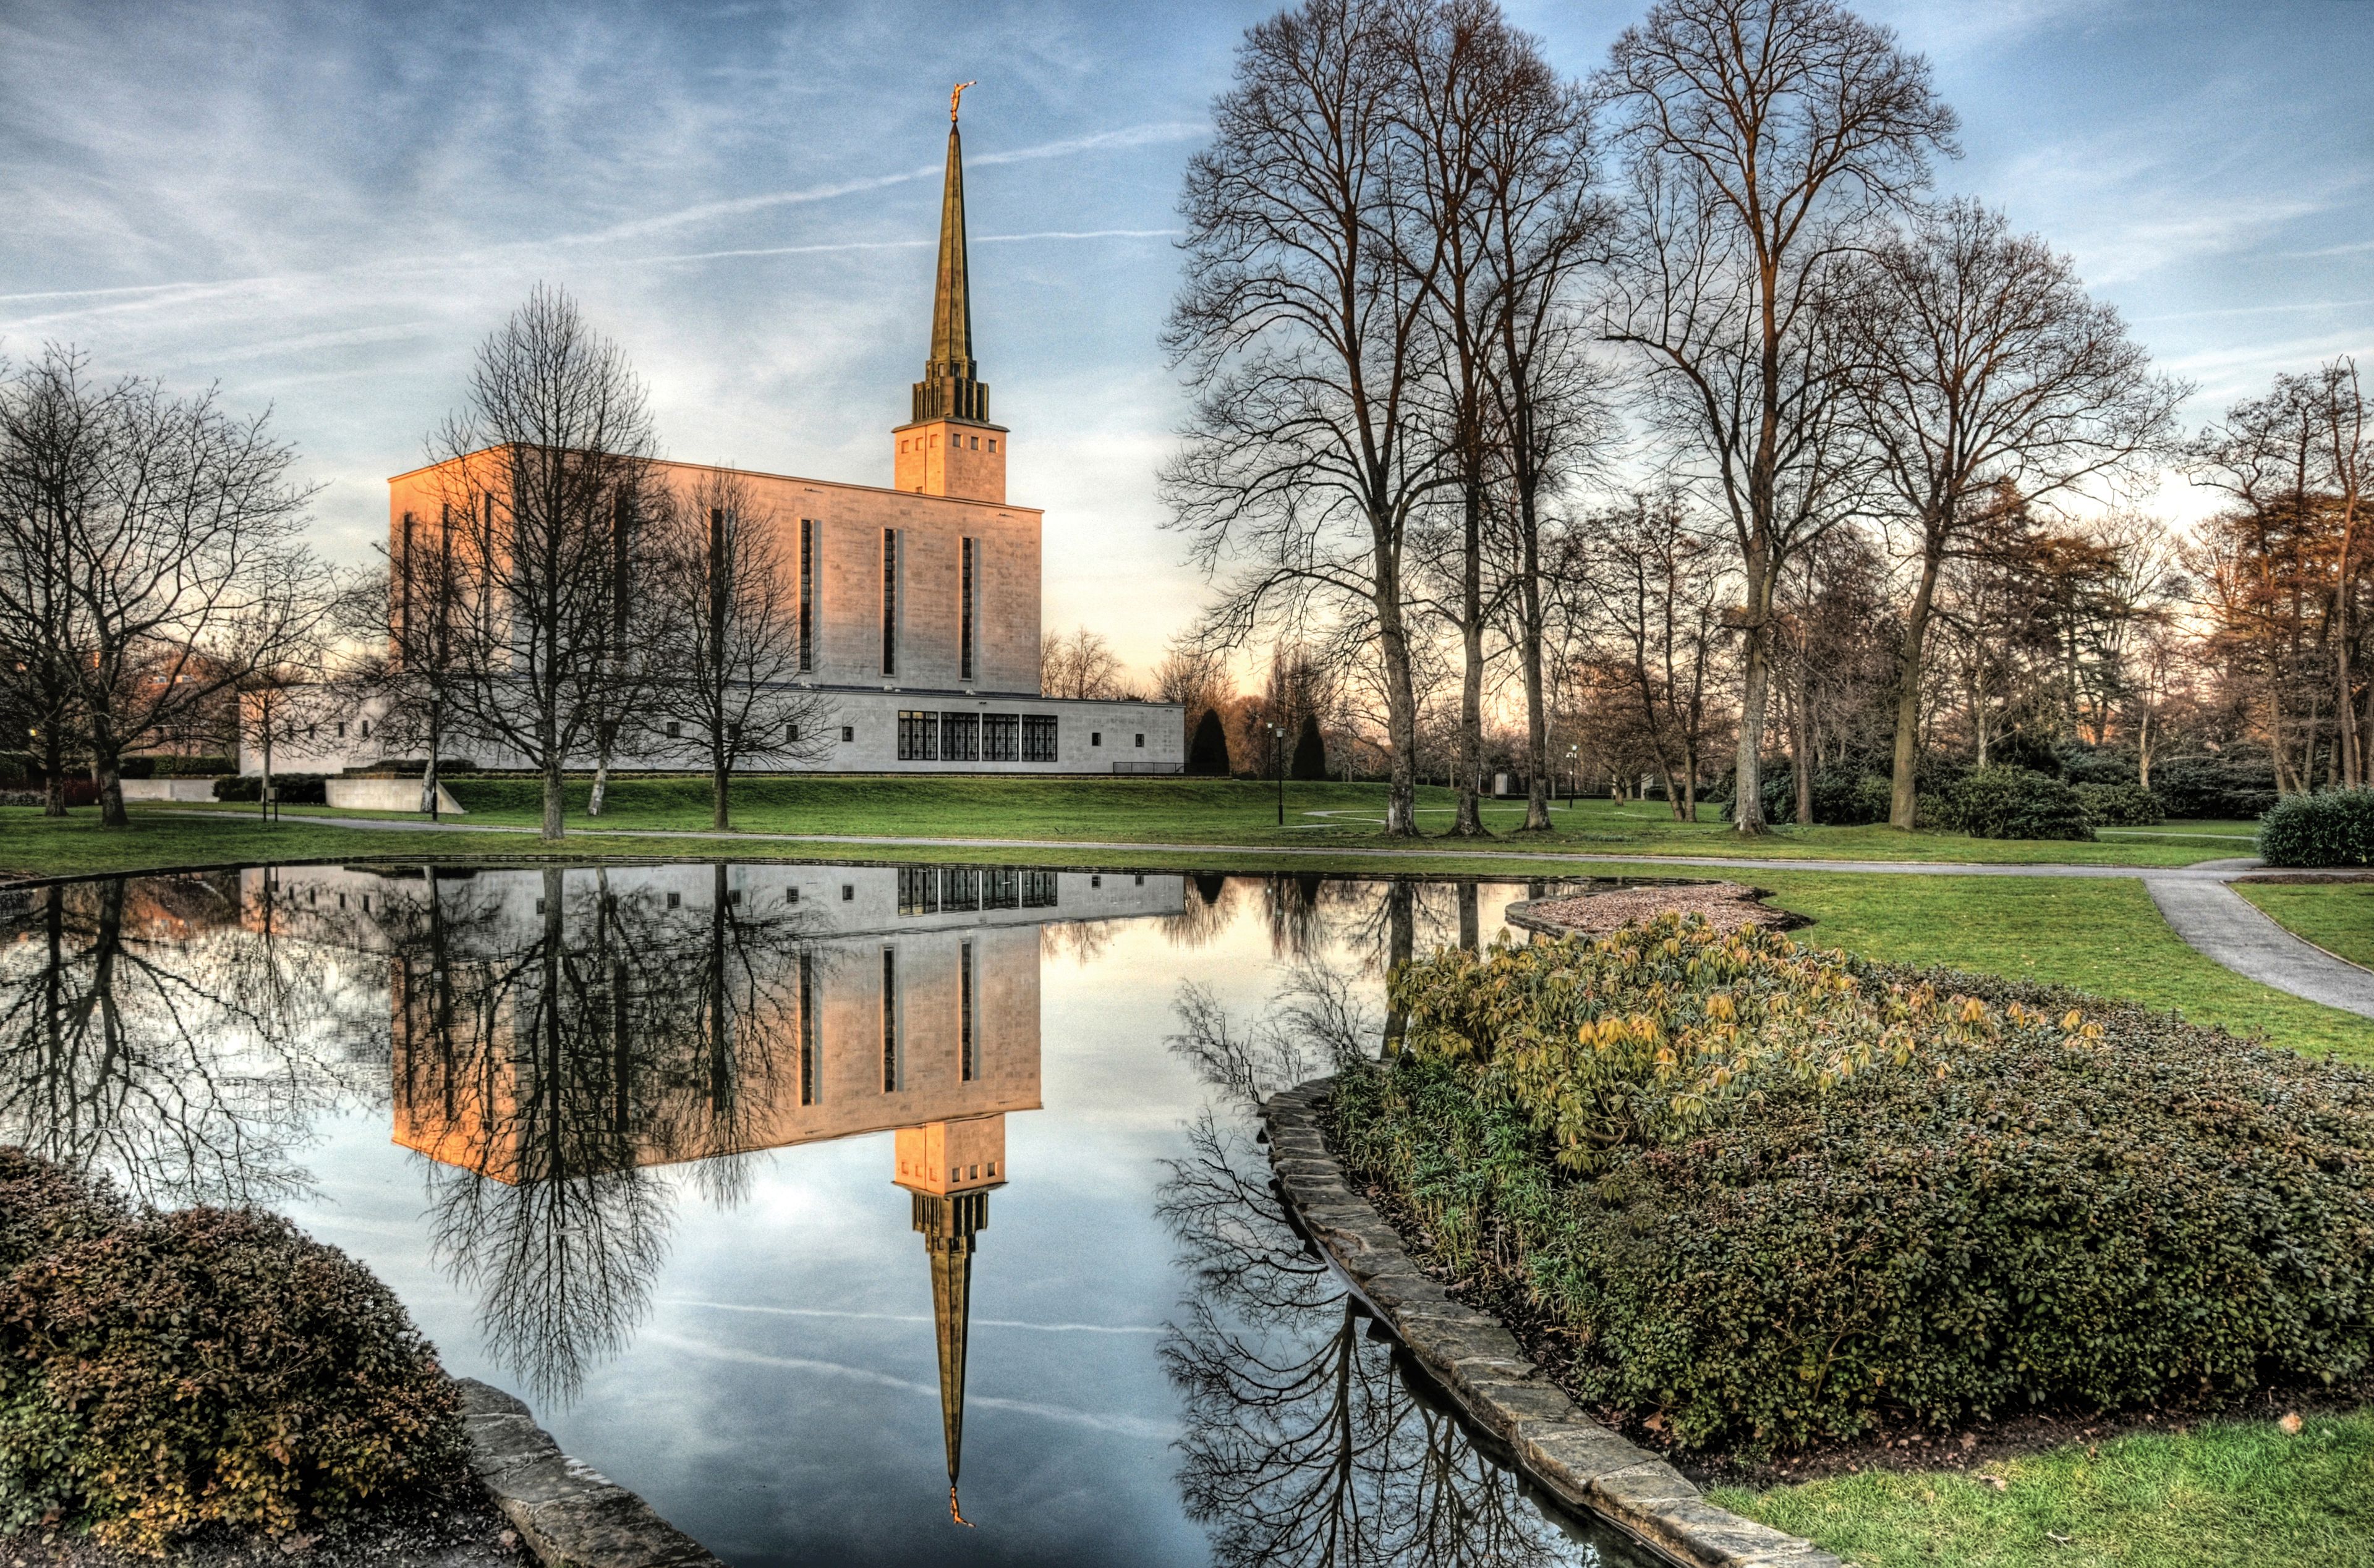 The London England Temple in the winter, including scenery.